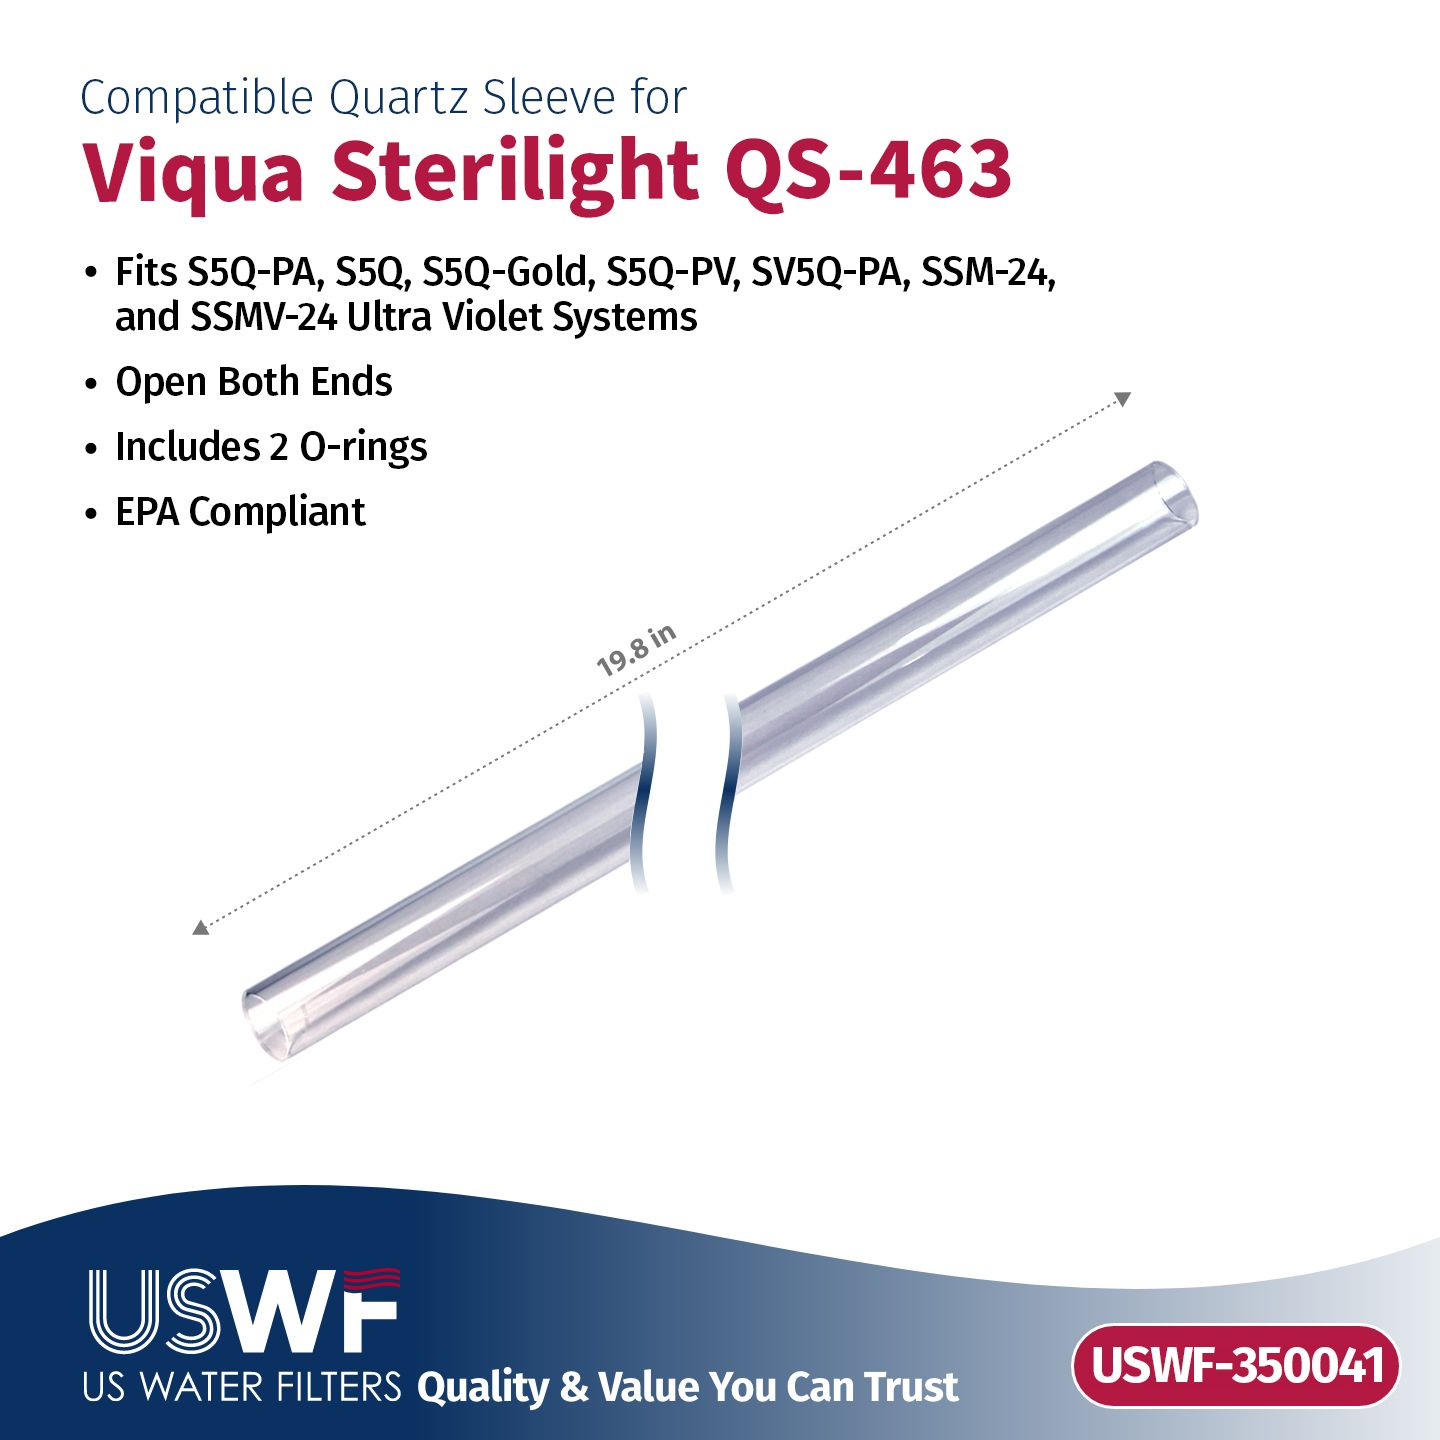 Replacement for VIQUA S463-QL UV Lamp/Sleeve Combo by USWF | Fits the VIQUA S5Q, SV5Q-PA, & SSM-24 Series UV Systems